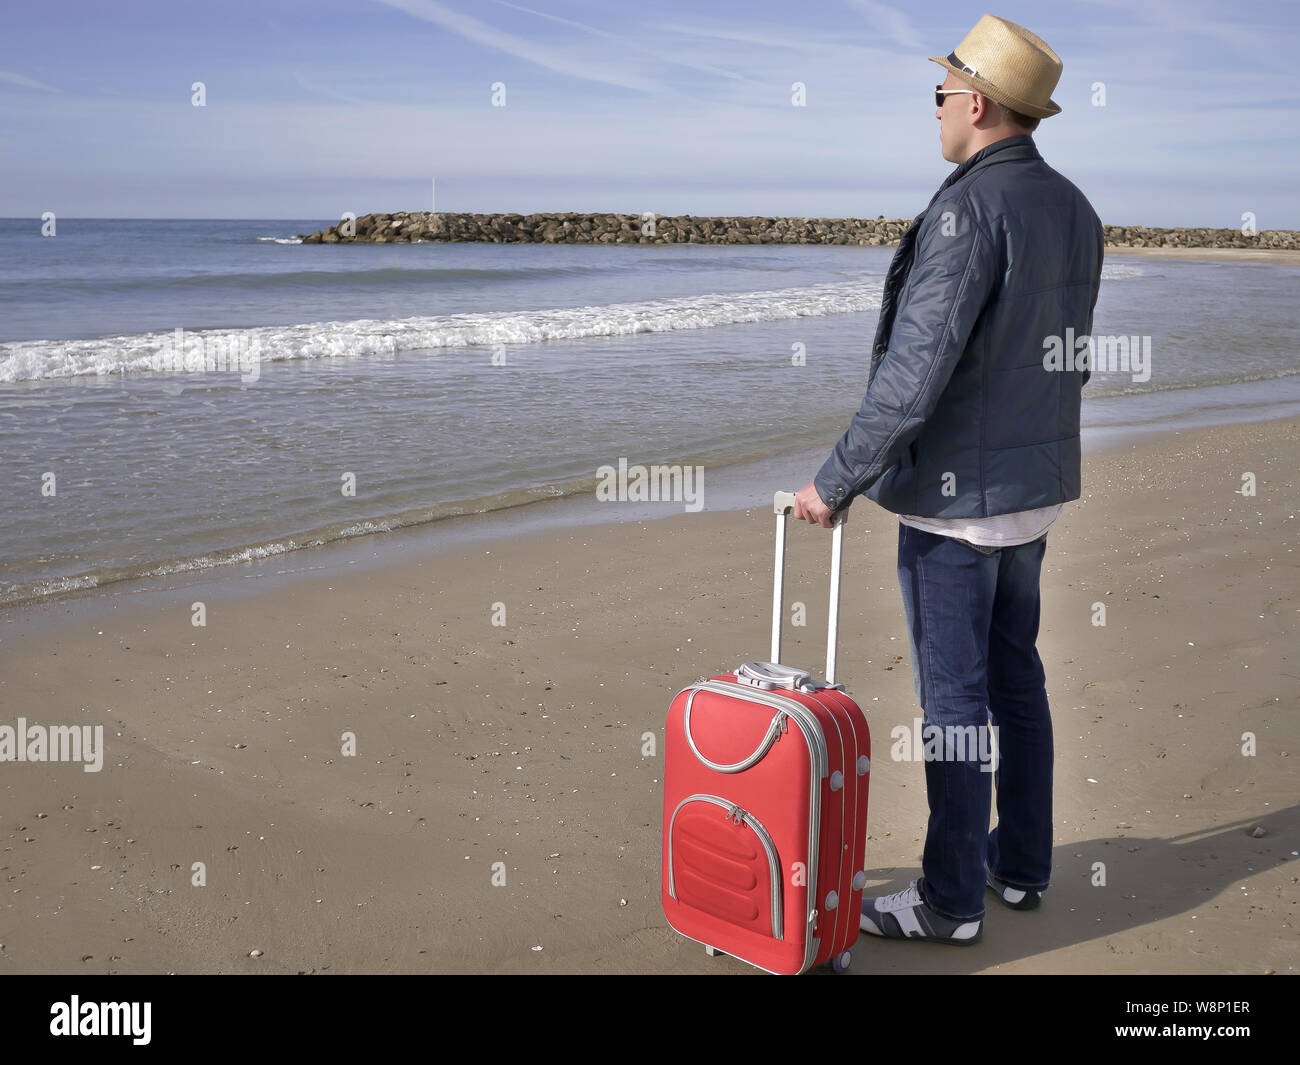 A man tourist in a hat and with a red suitcase stands on the seashore Stock Photo